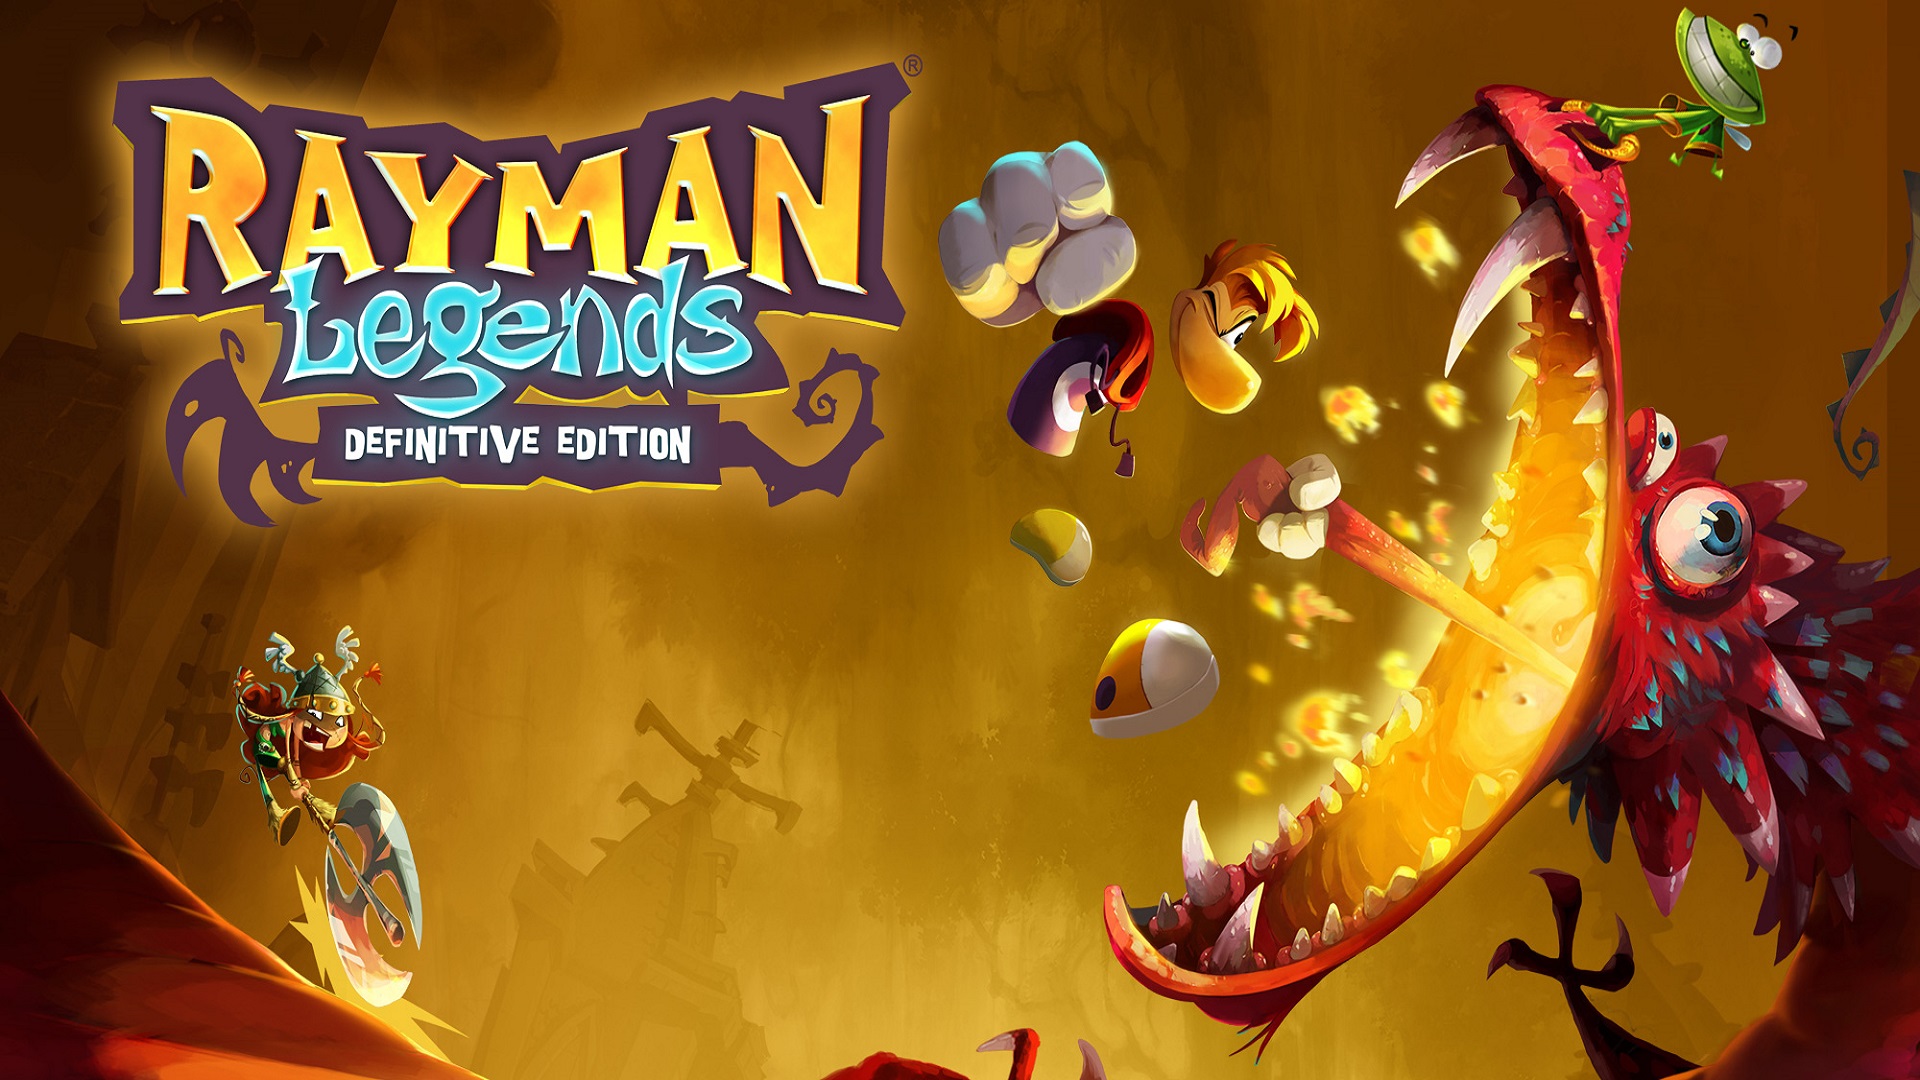 Rayman Legends Definitive Edition Cover Wallpaper - Rayman Legends Definitive Edition - HD Wallpaper 